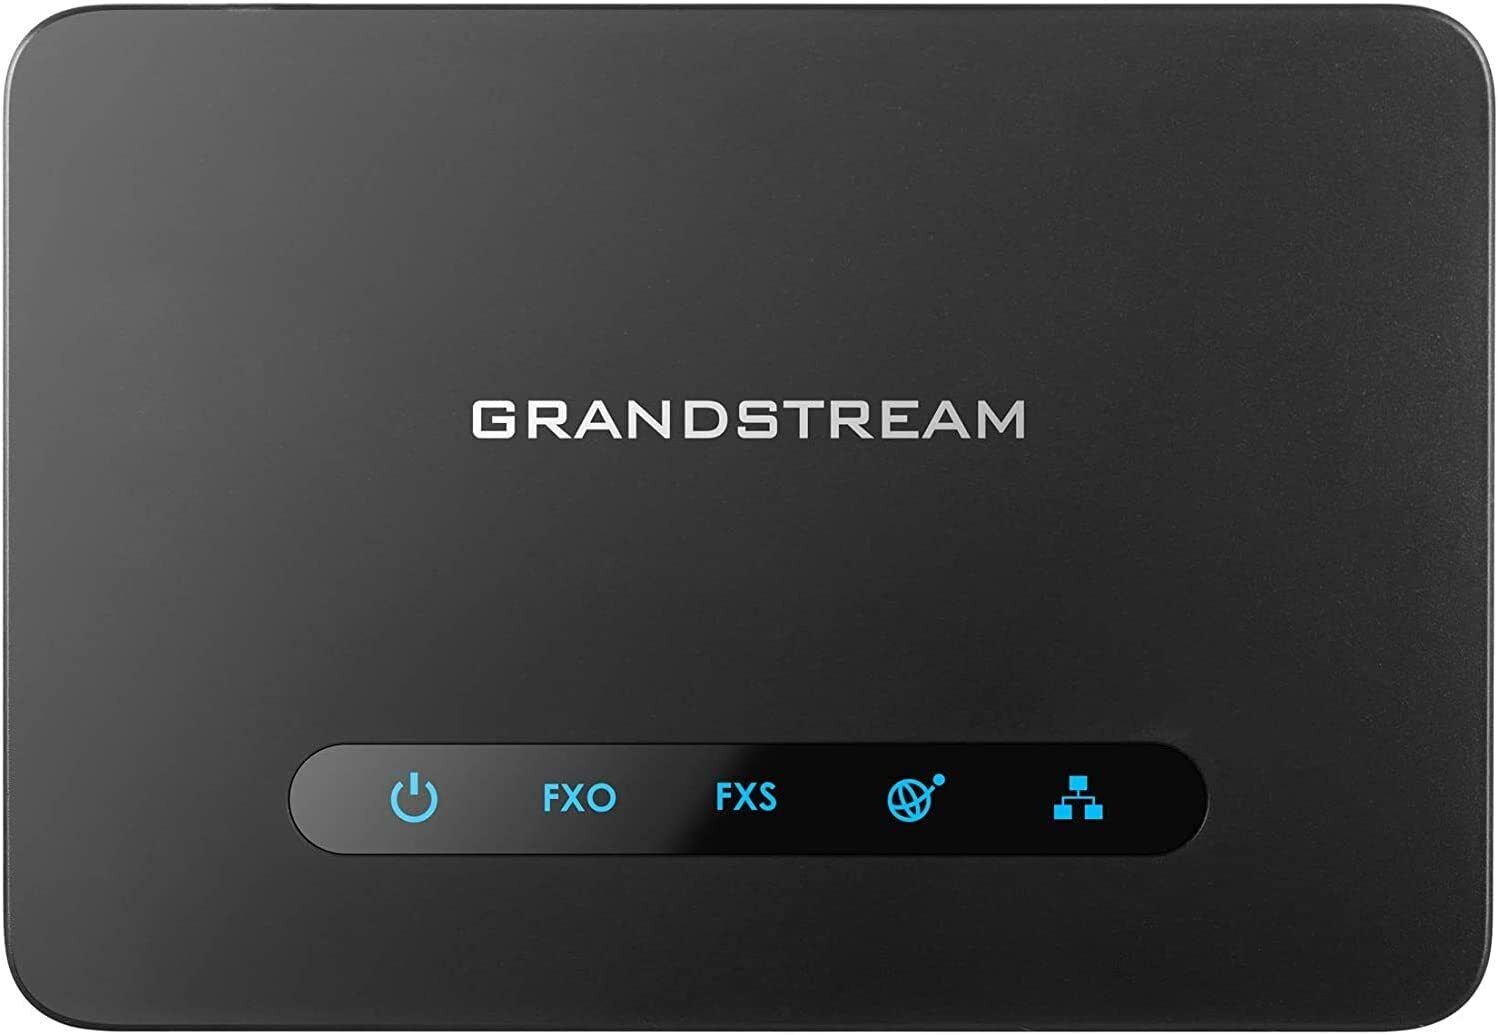 Grandstream HT813 VoIP Gateway Fast Ethernet Hybrid ATA with FXS and FXO Ports